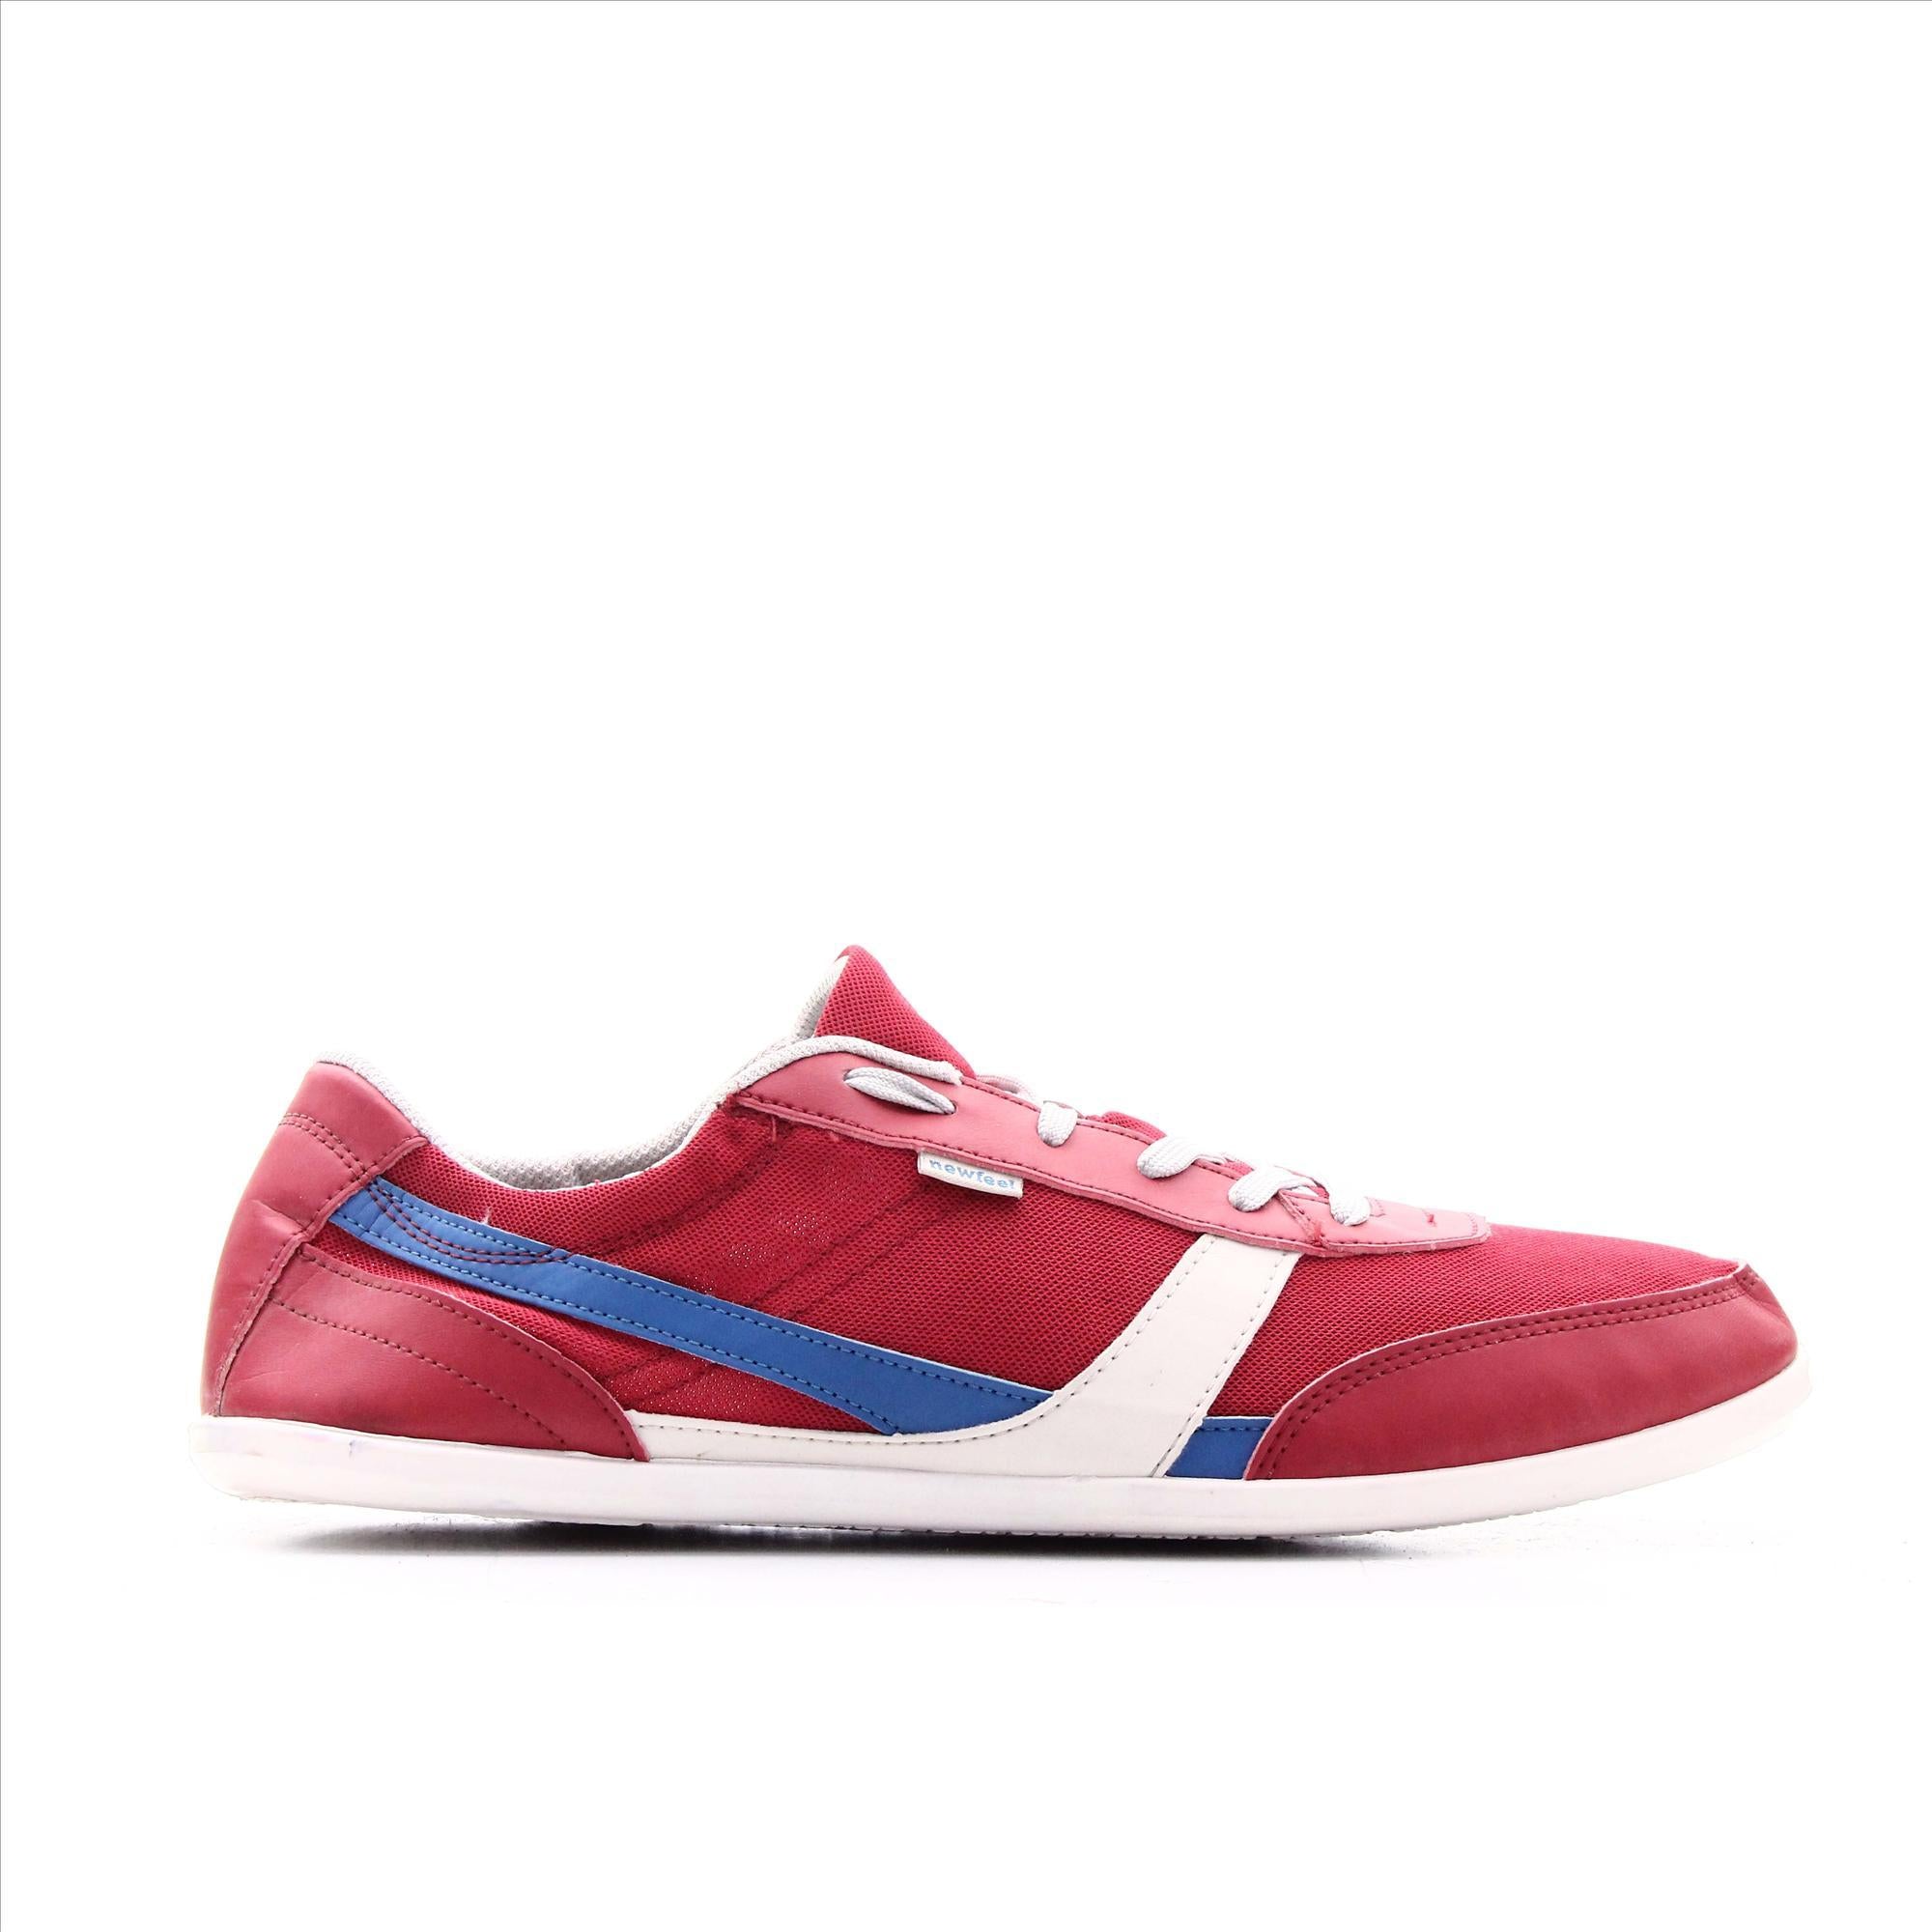 newfeel shoes red